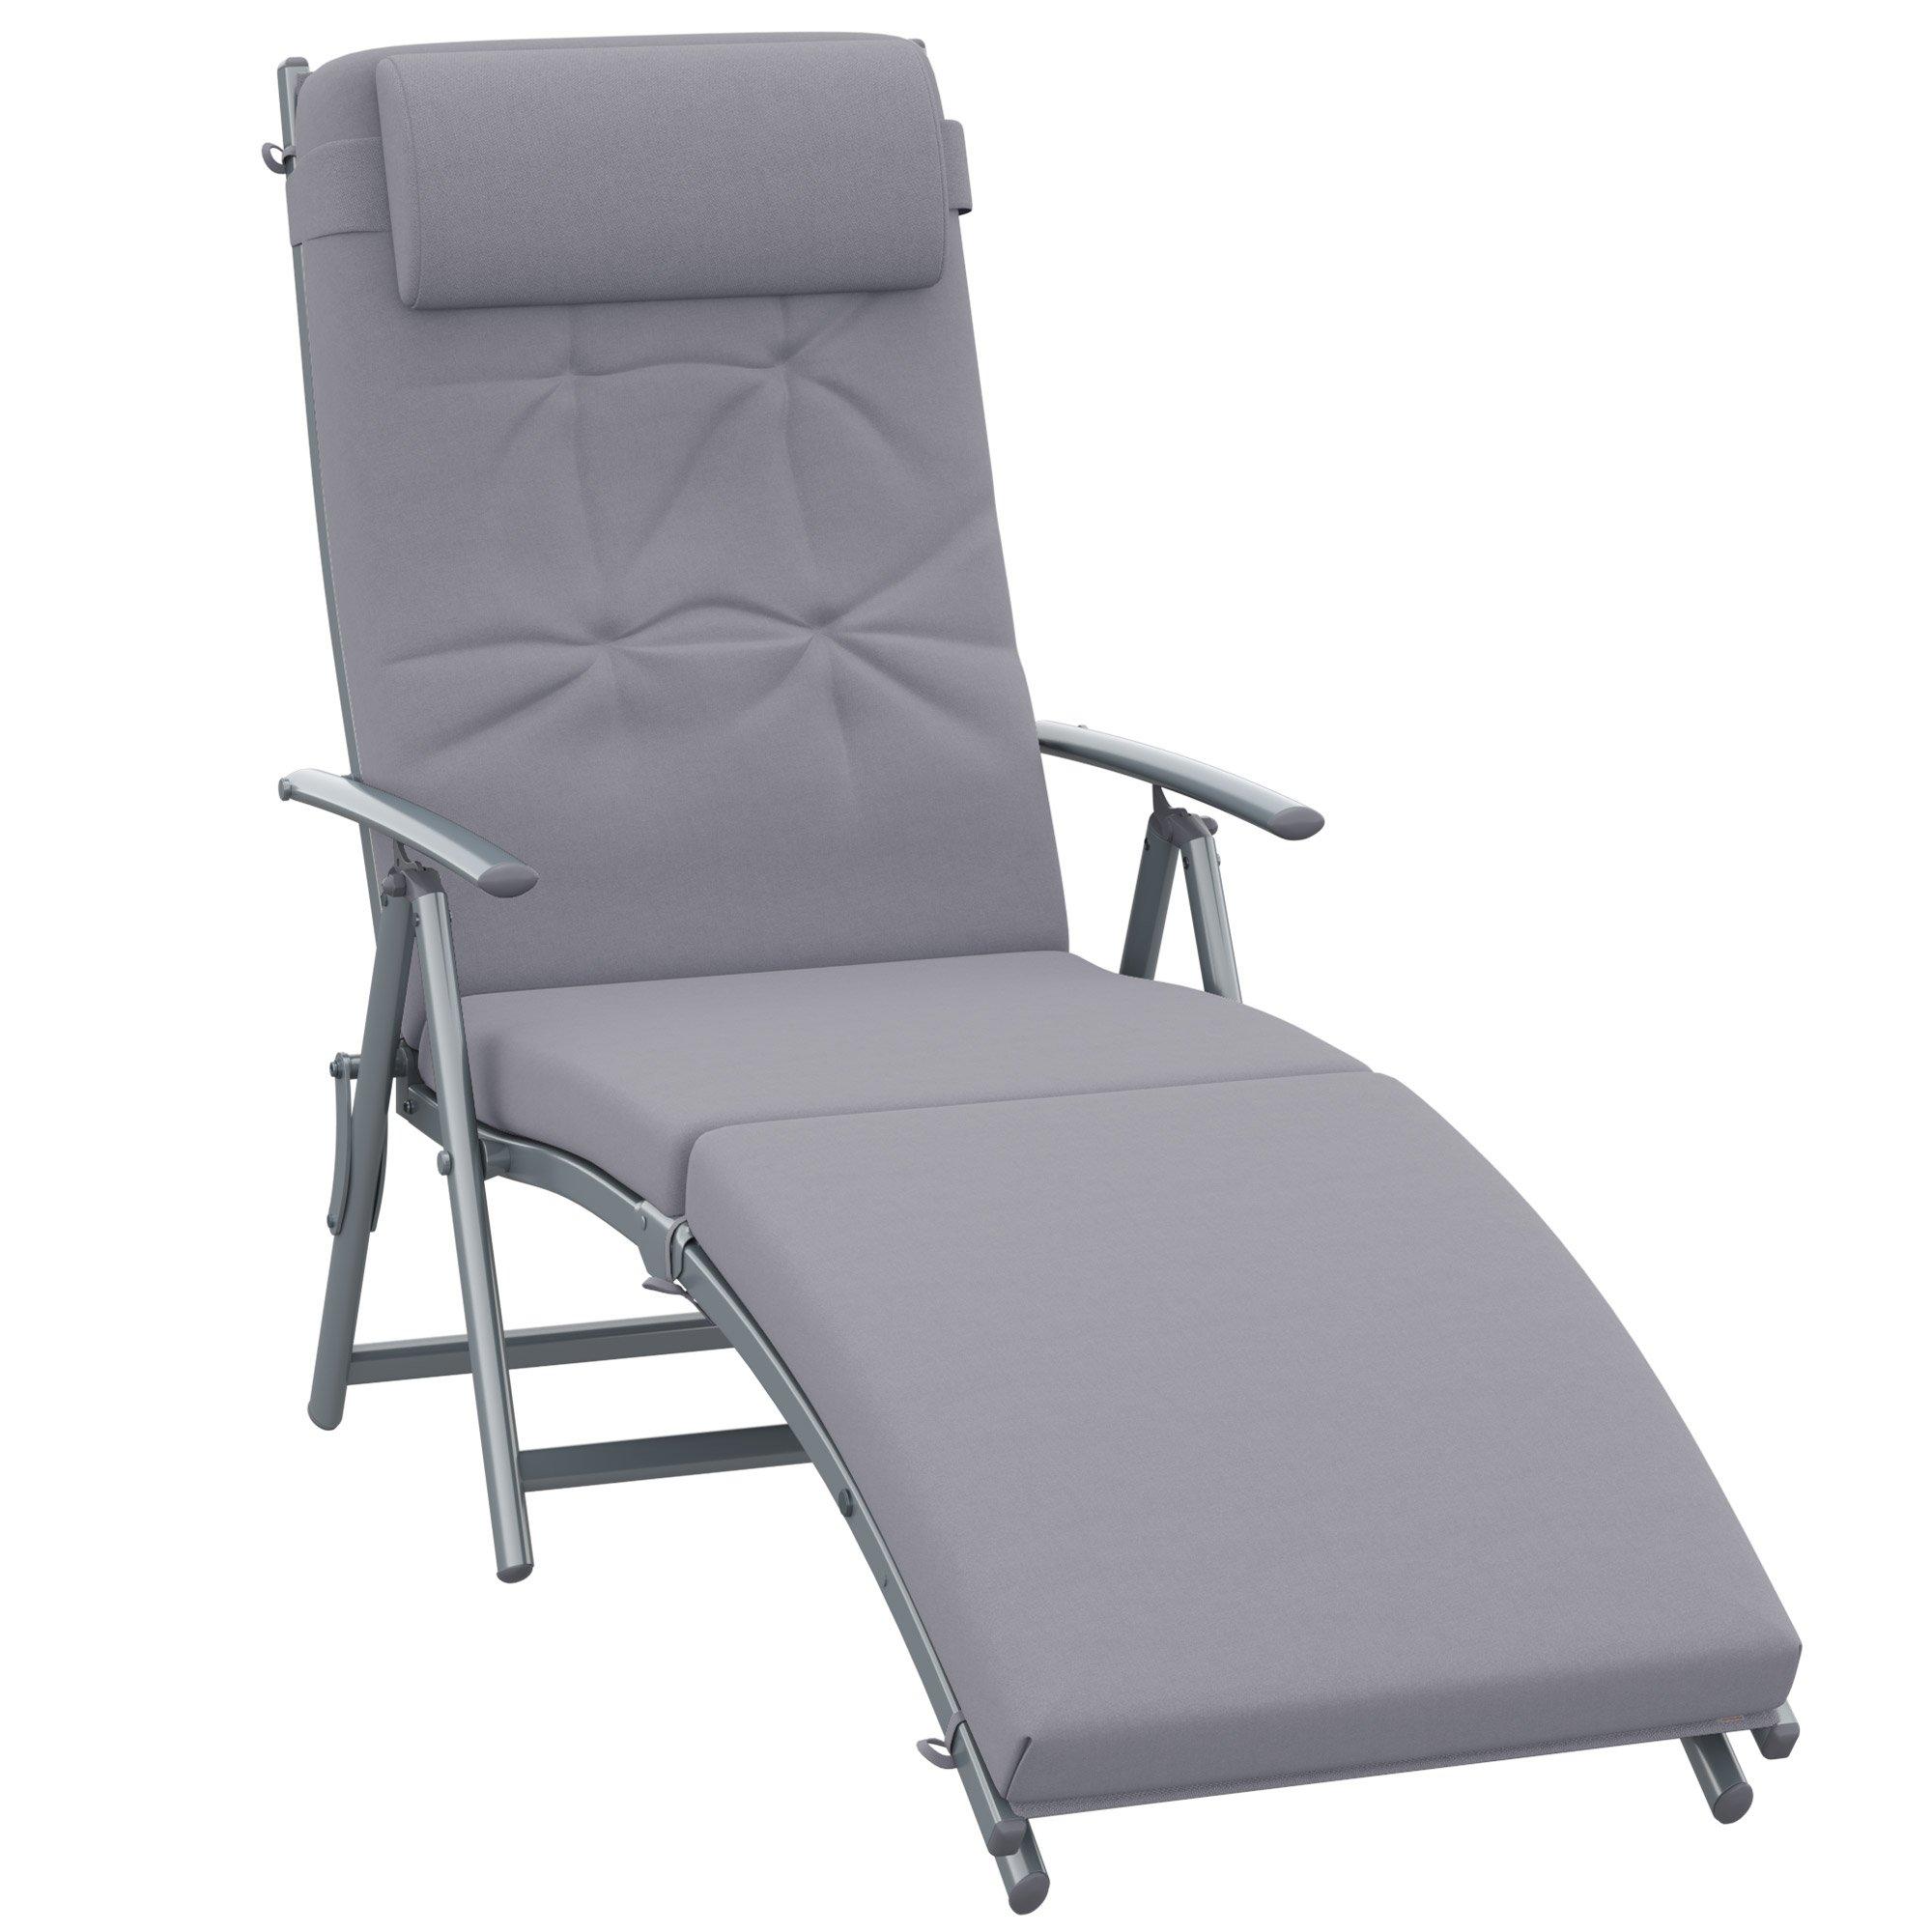 Sun Lounger Recliner Foldable Padded Seat Adjustable Texteline